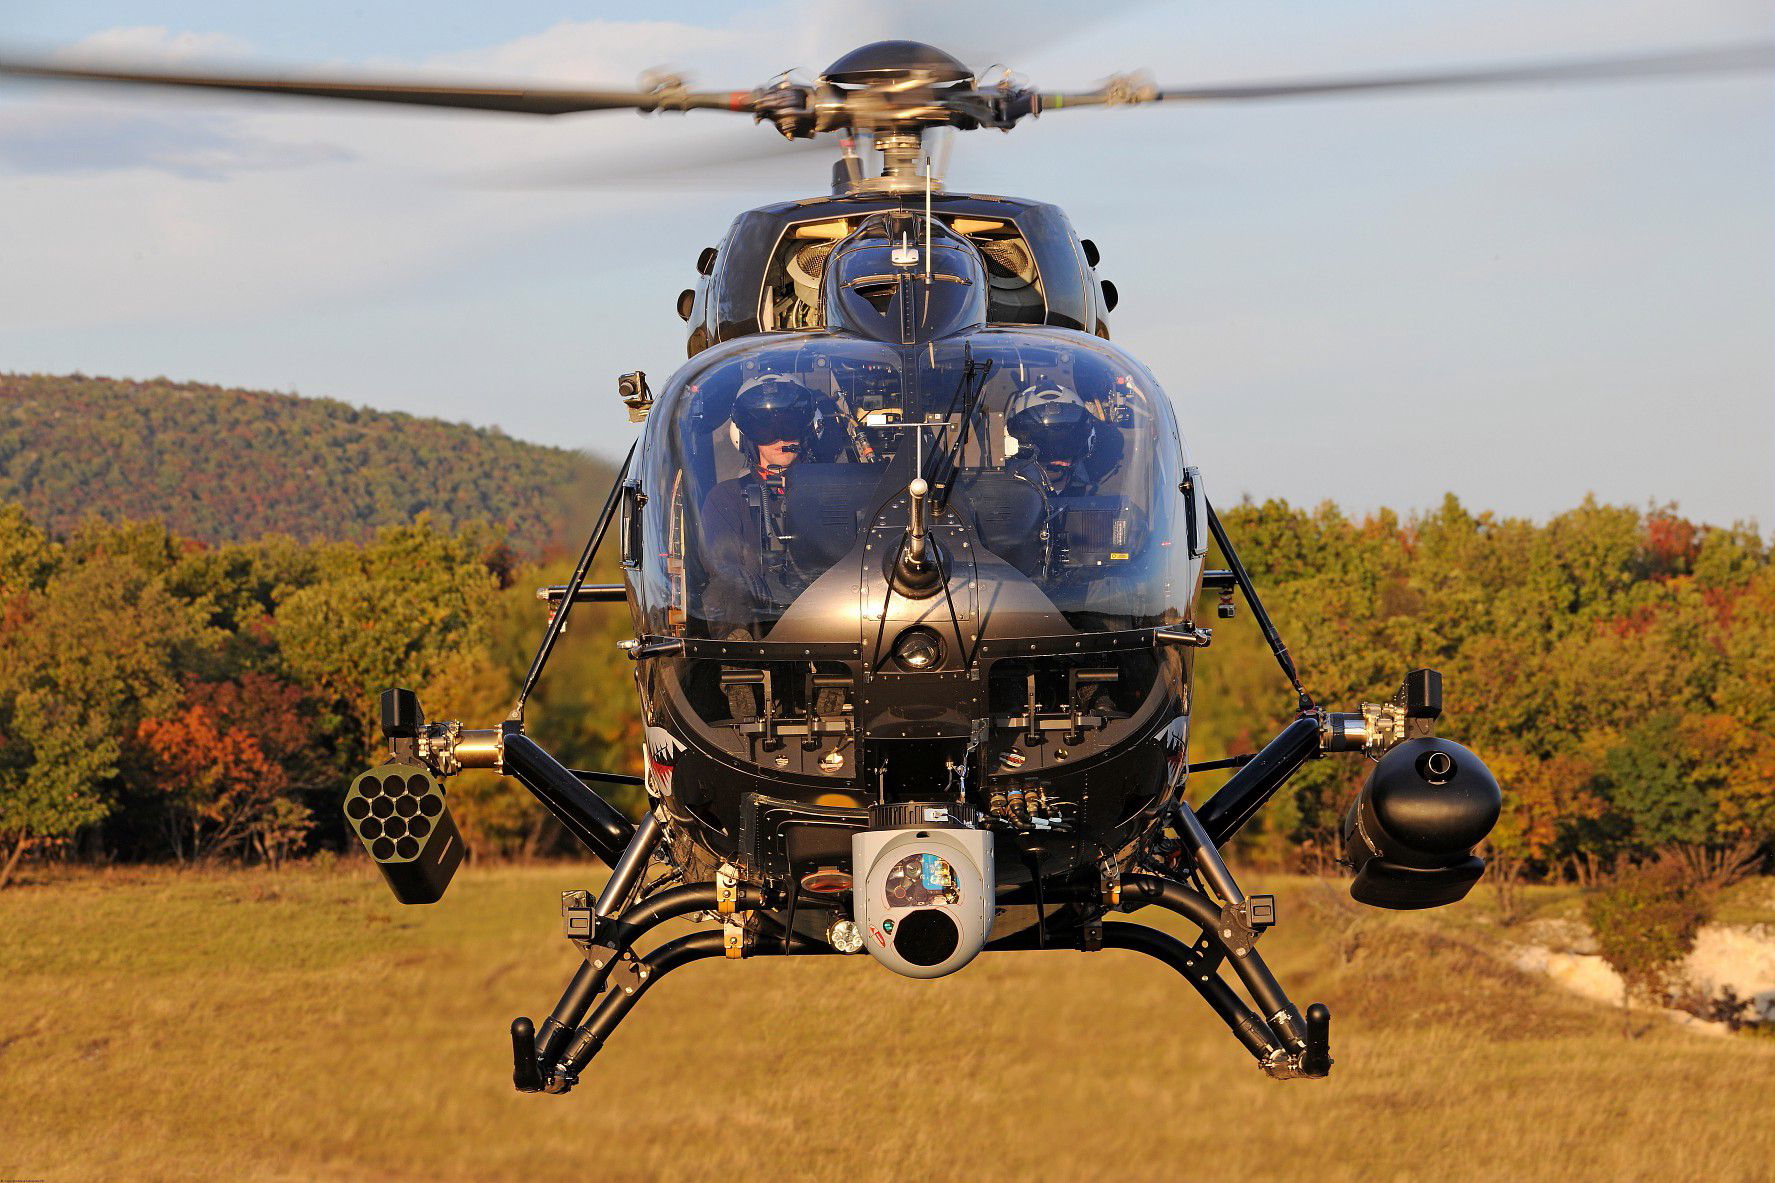 Airbus H145M with Hforce weapon system. Click to enlarge.